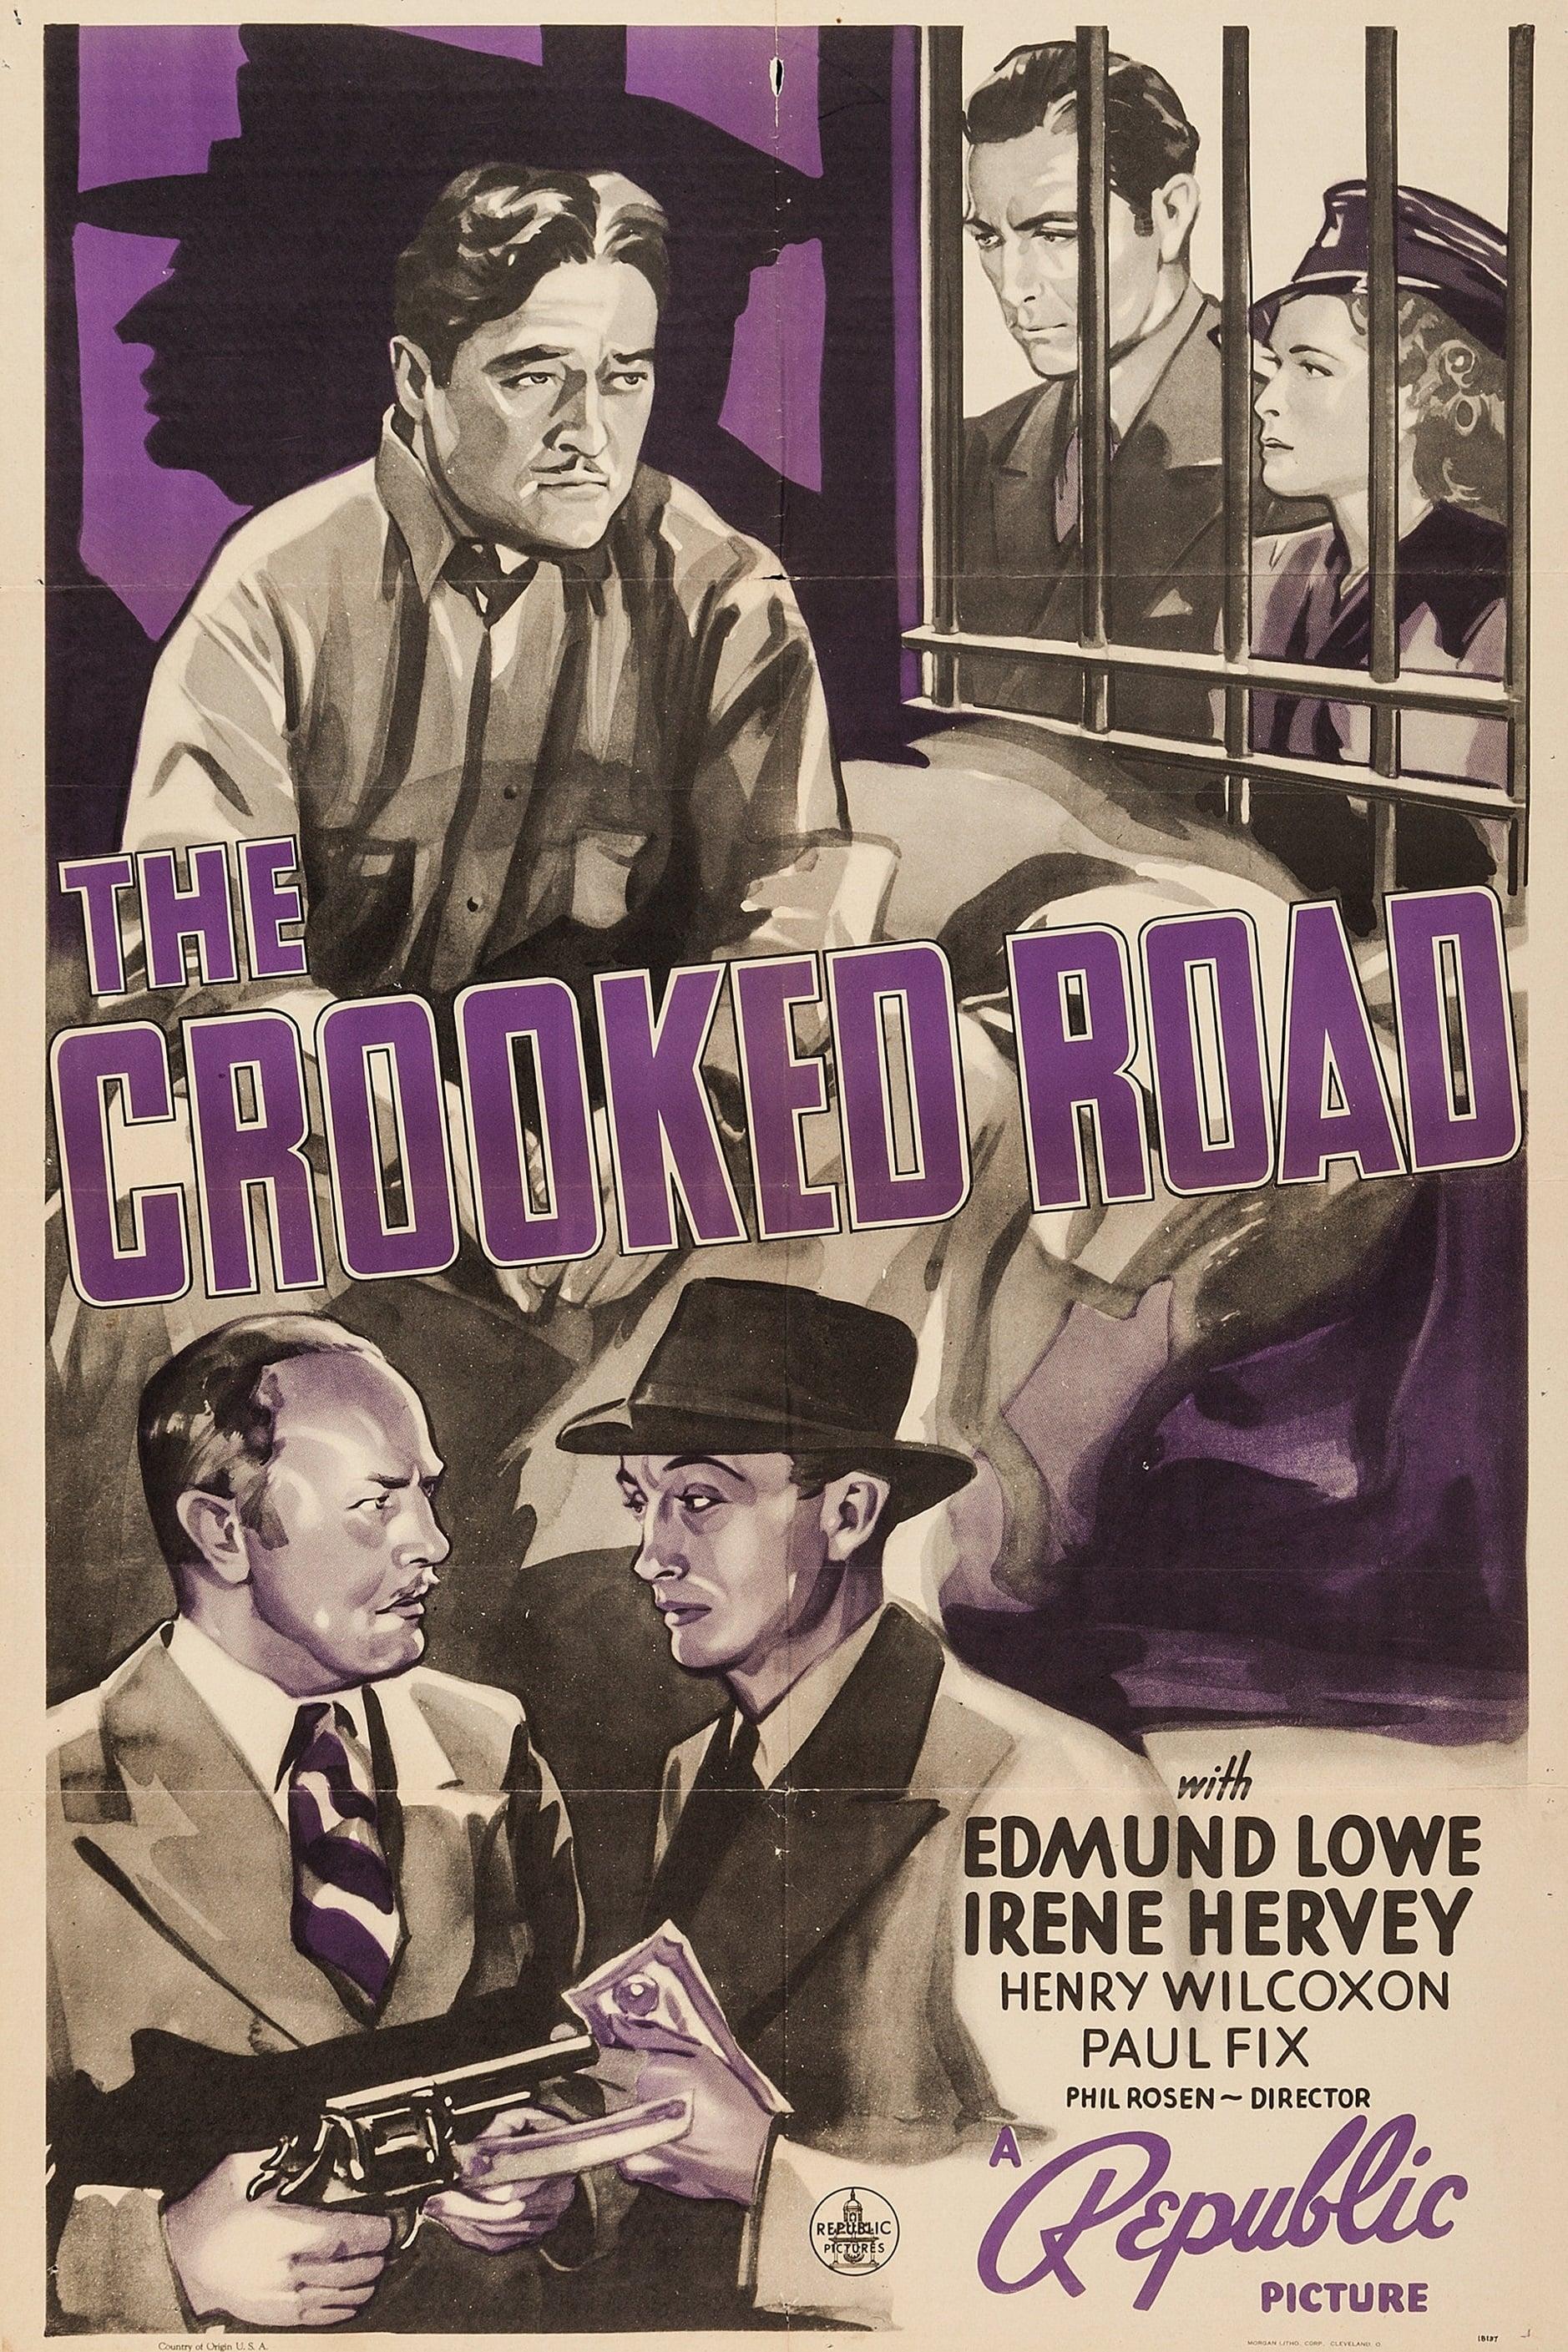 The Crooked Road poster